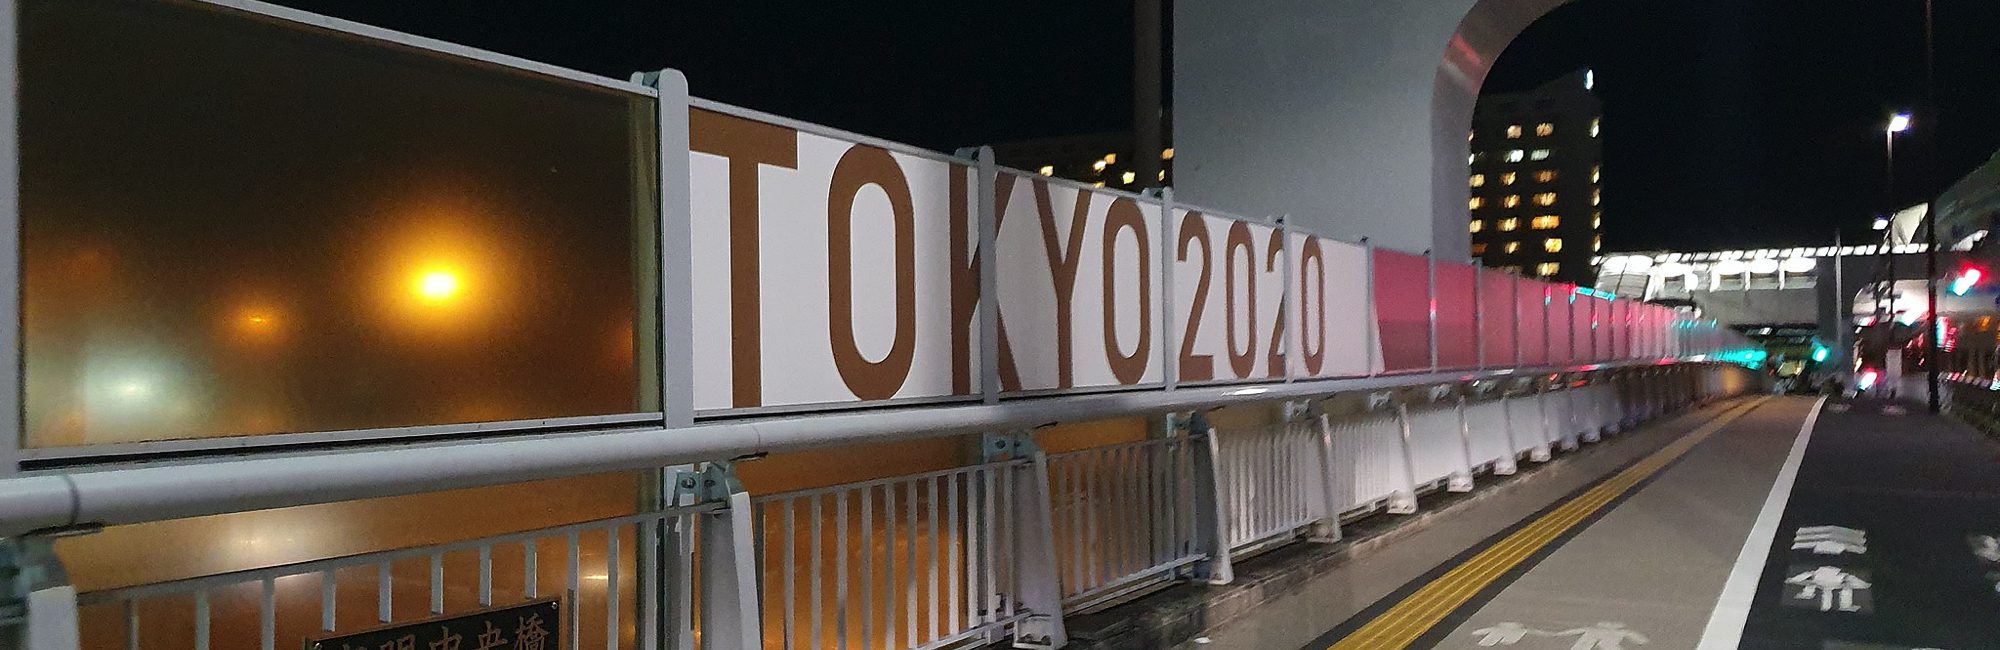 resiliency olympics tokyo 2020 sign for Tokyo 2020 Olympics in Ariake